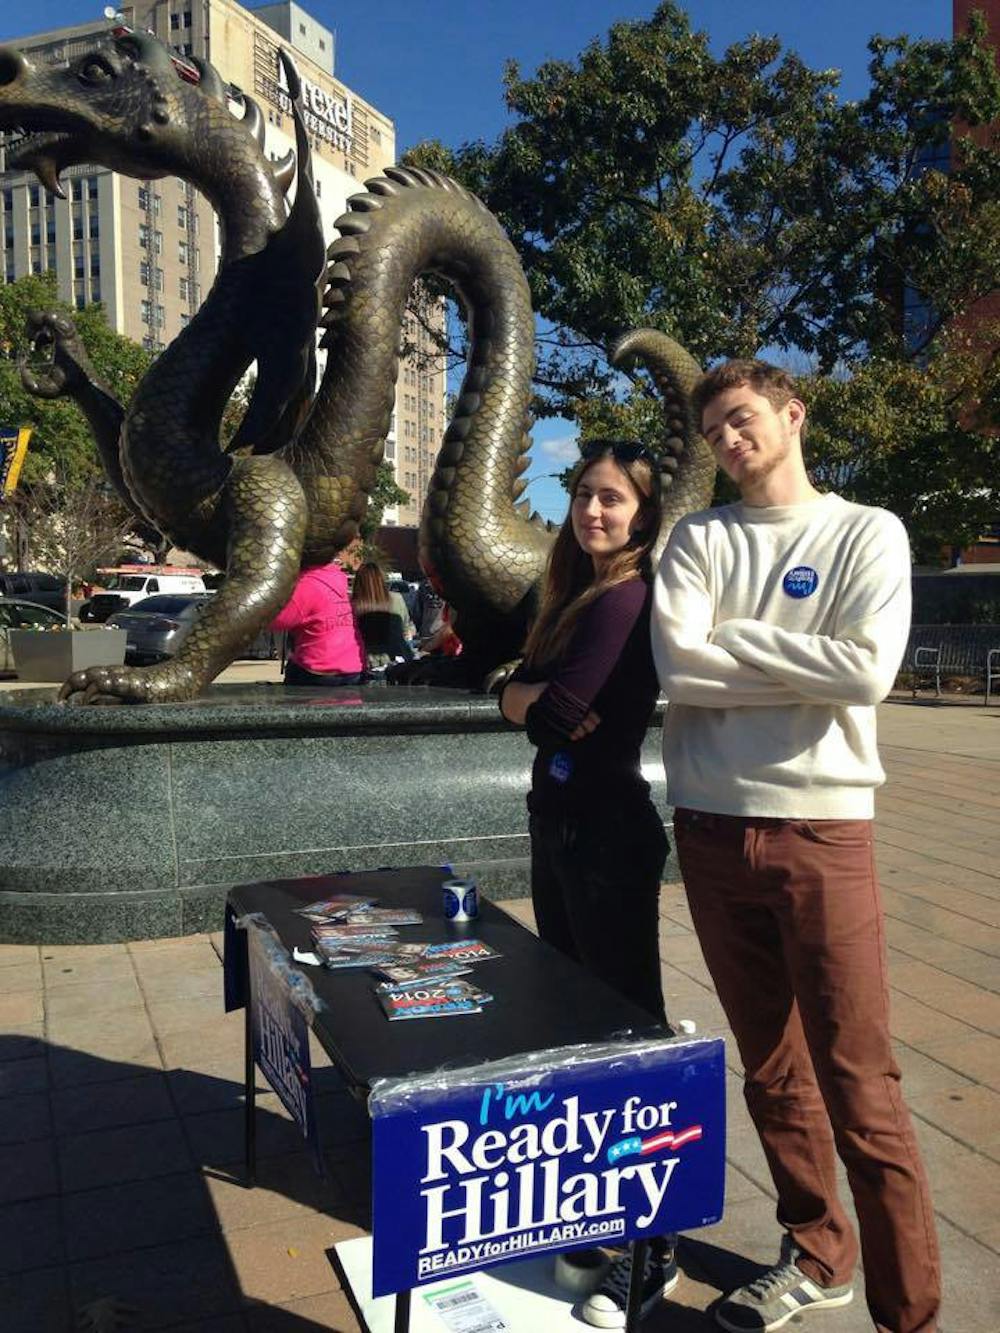 <p>College sophomores <strong>Emily Irani </strong>and <strong>Paul-Julien Burg</strong> canvassed with Penn for Hillary at Drexel in October.</p>